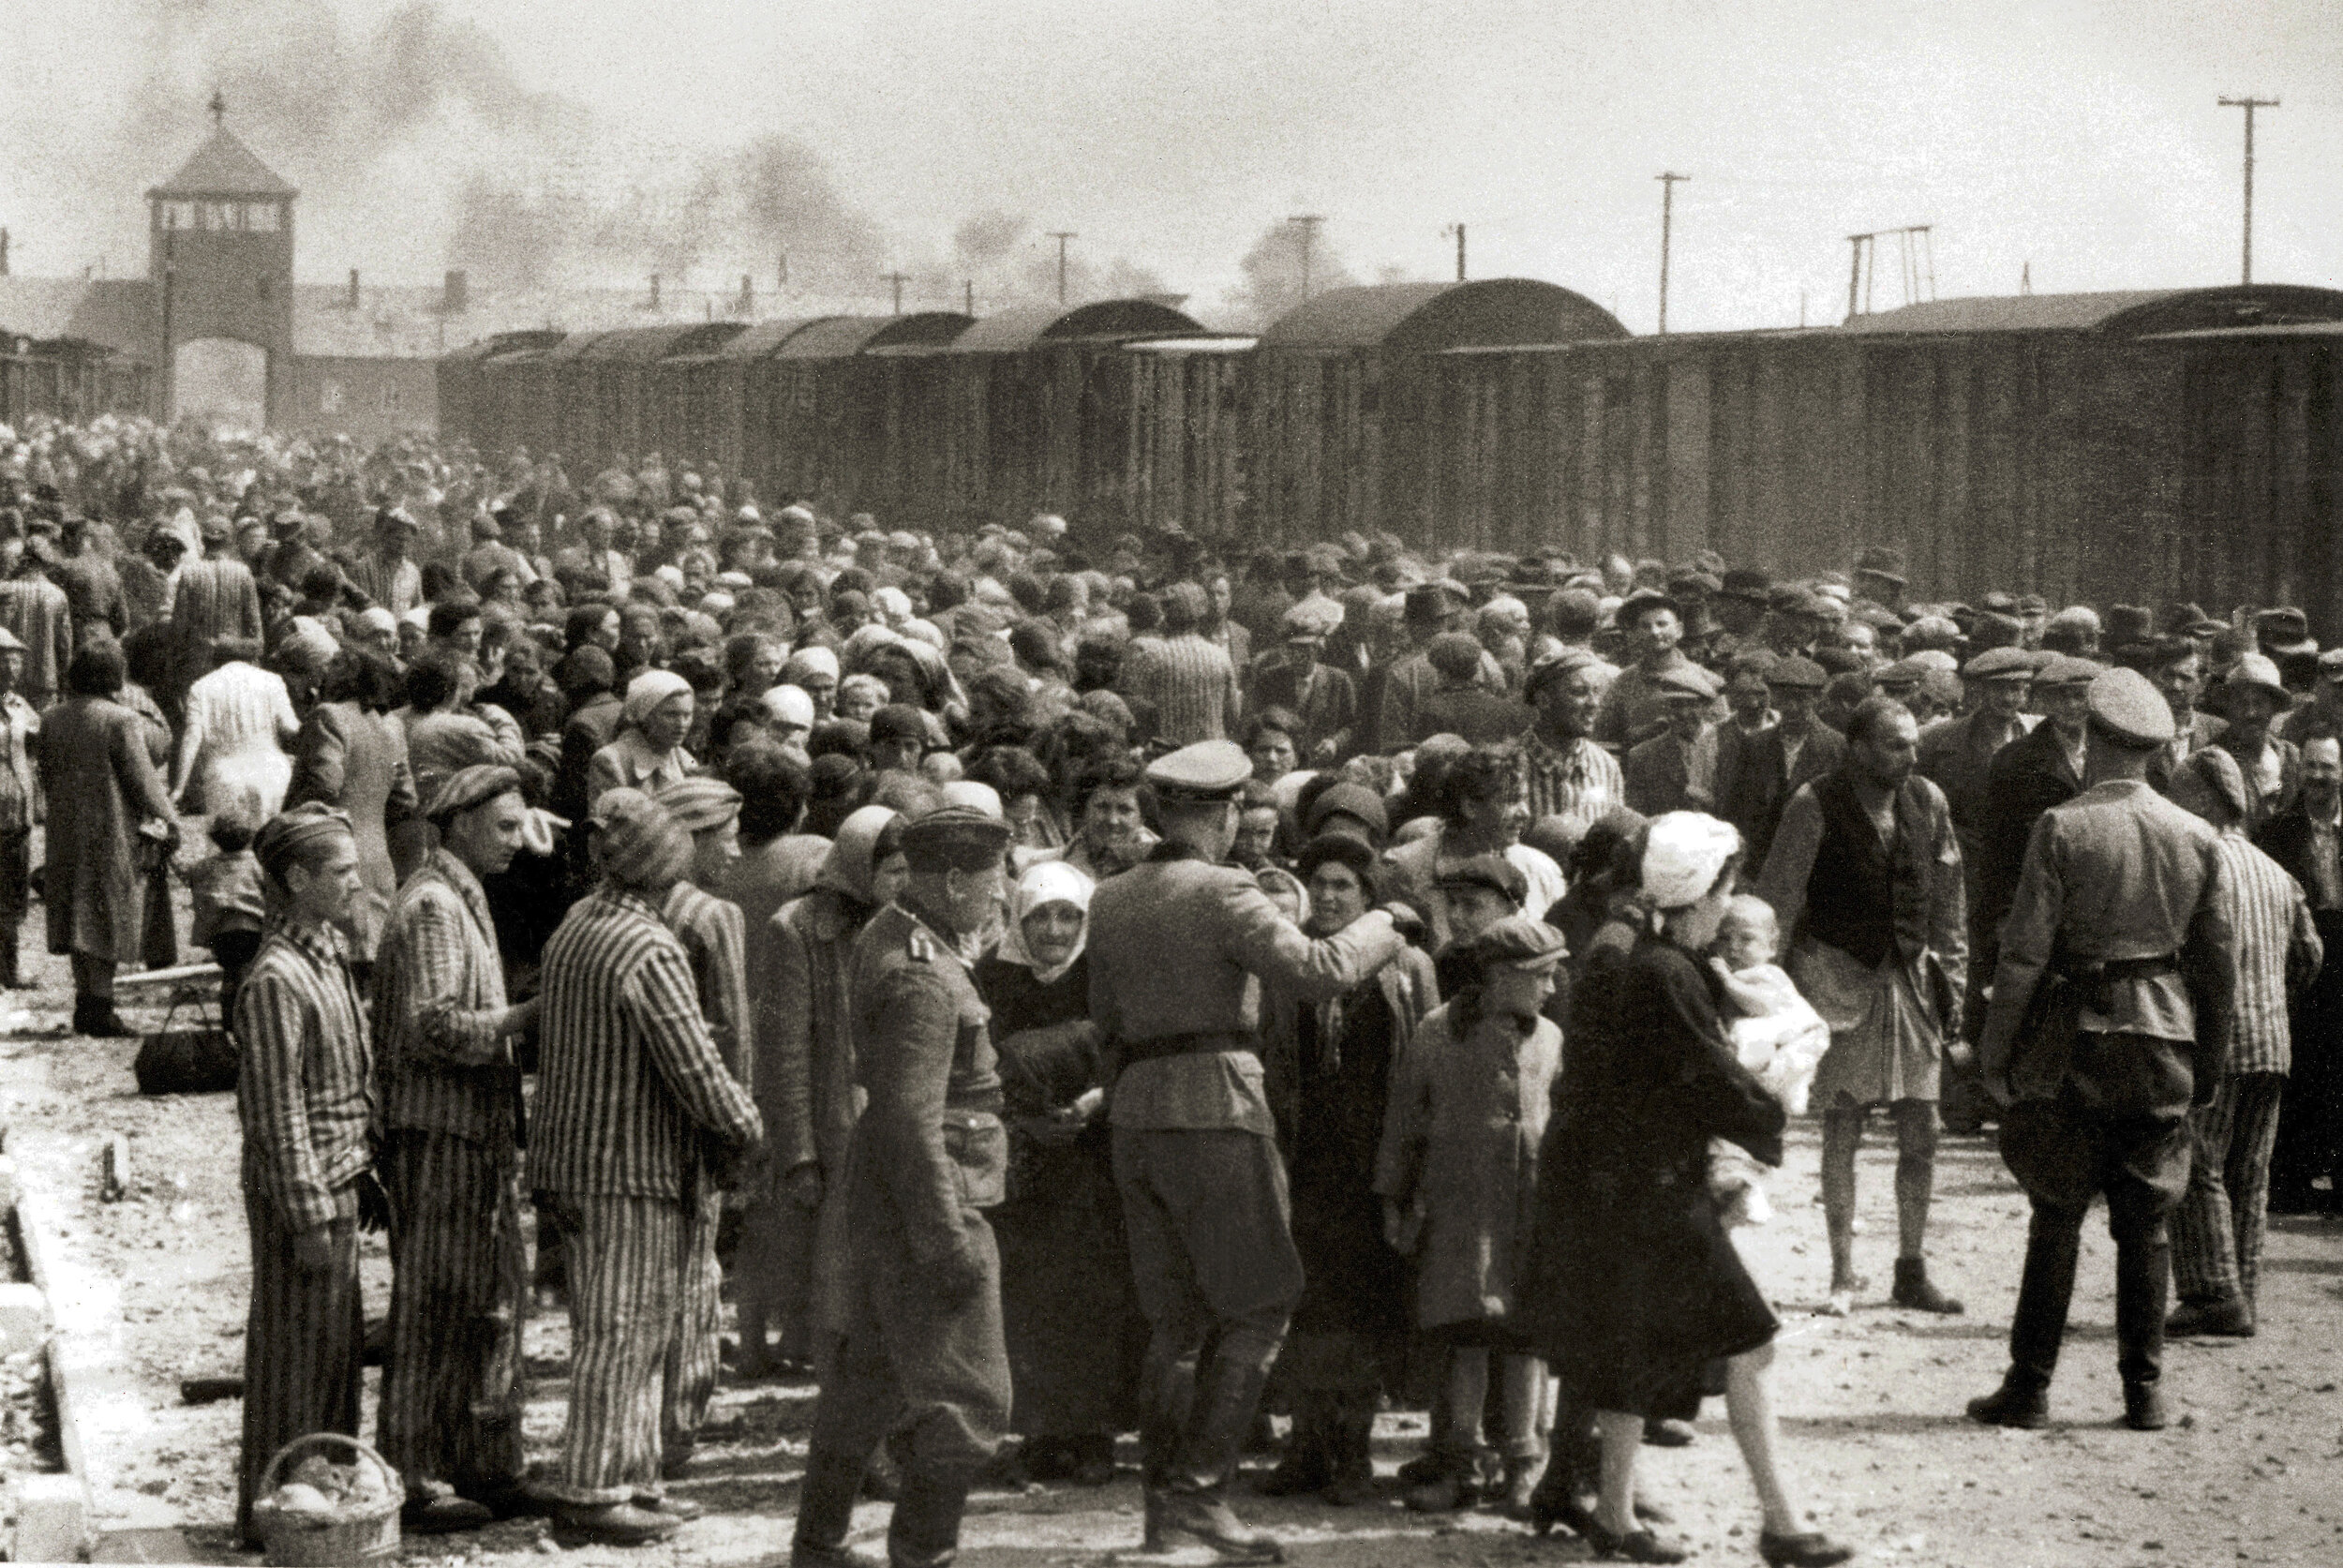 "Selection" of Hungarian Jews on the ramp at Auschwitz II-Birkenau in German-occupied Poland, around May 1944.